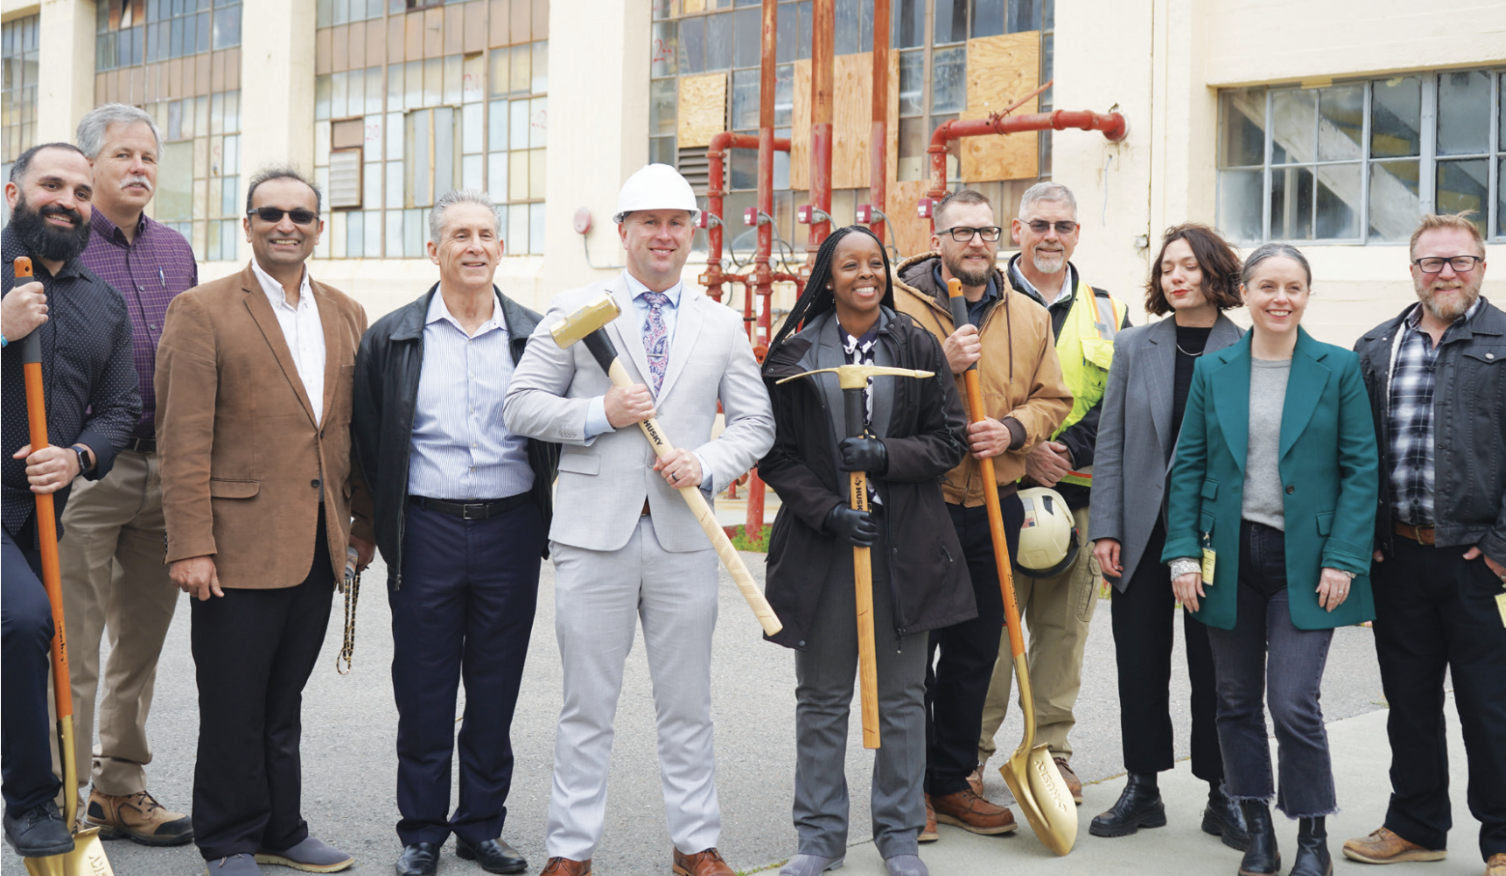 San Quentin breaks ground, begins building historic learning center